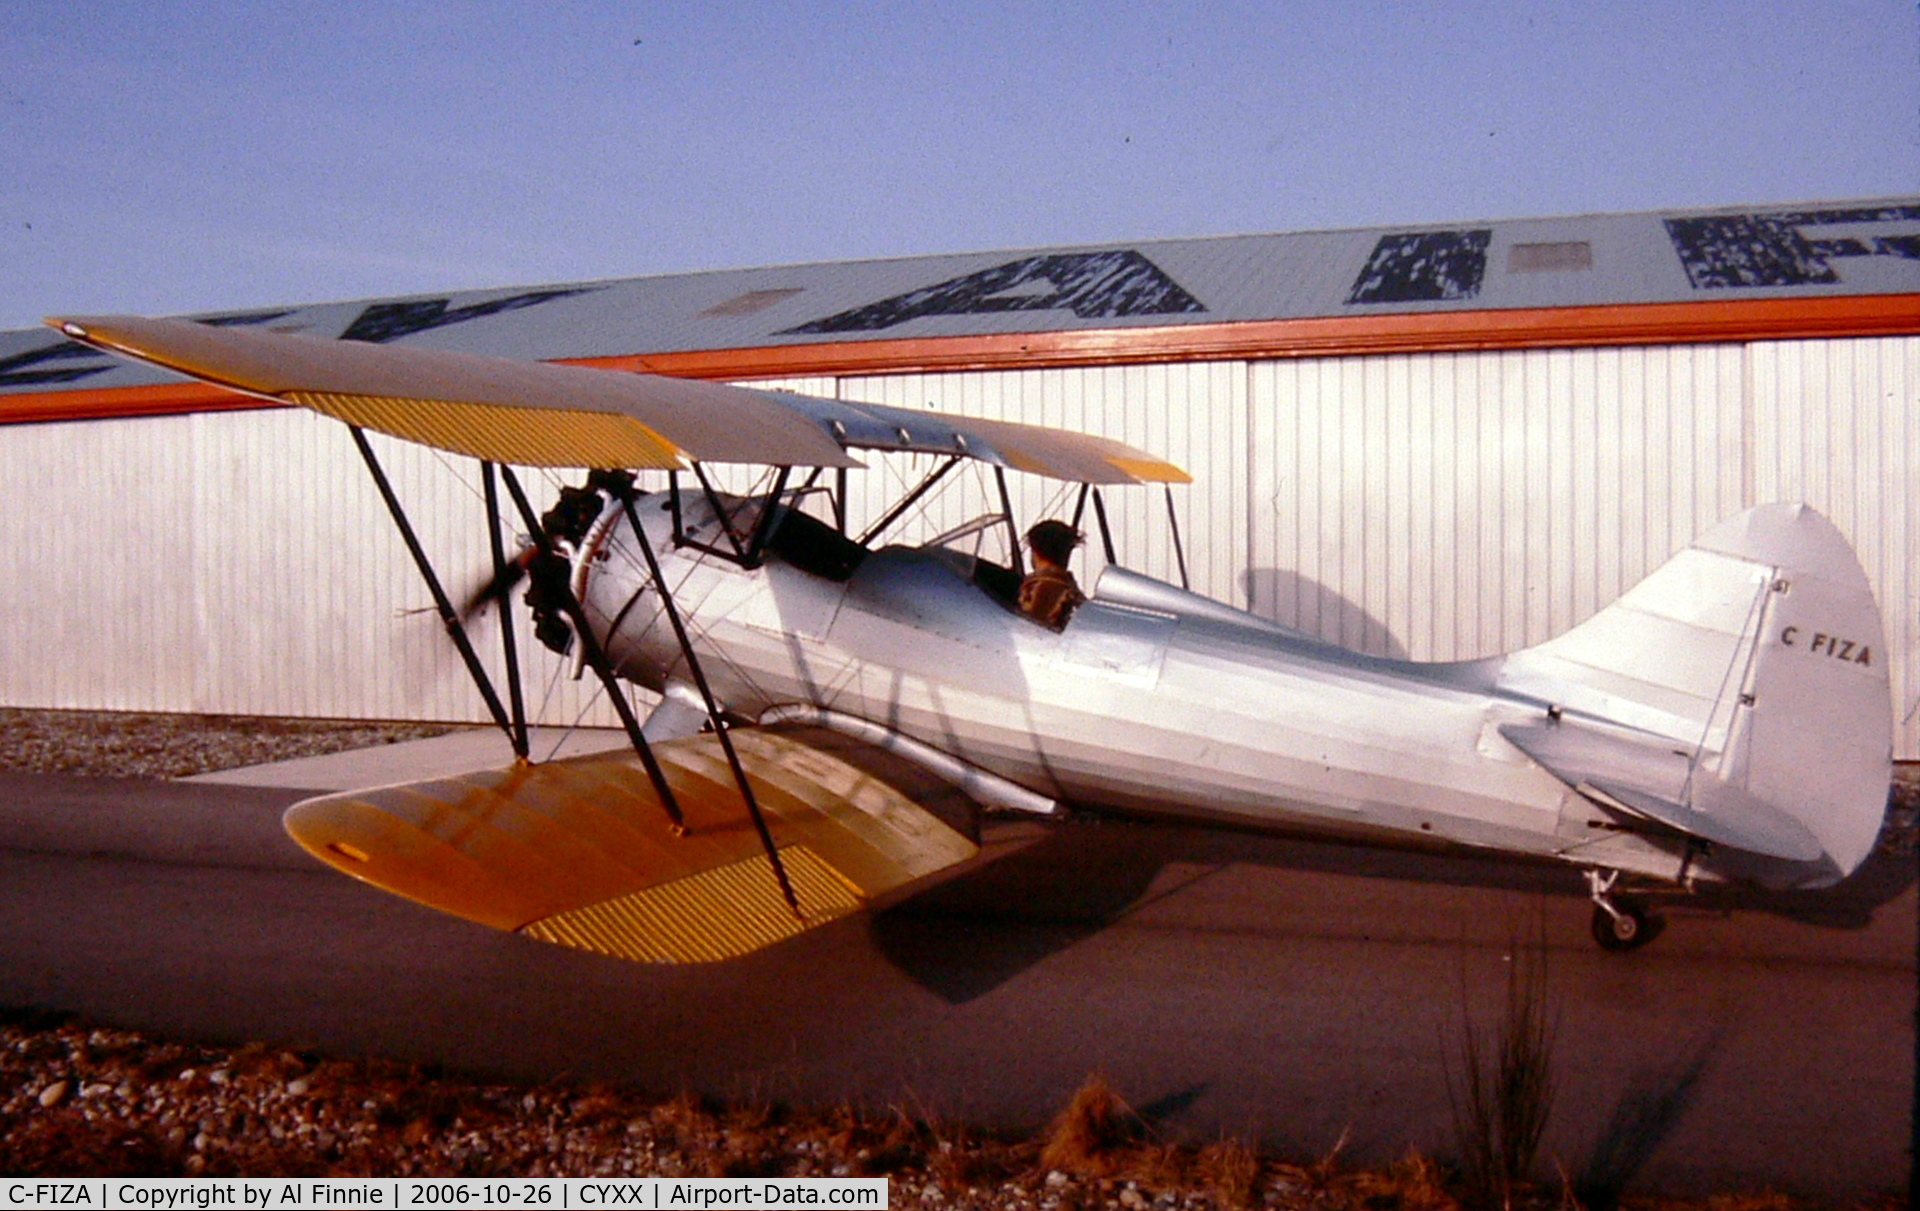 C-FIZA, 1949 Waco UPF-7 C/N 5730, Seen at Abbotsford, BC, Canada in early 1970s